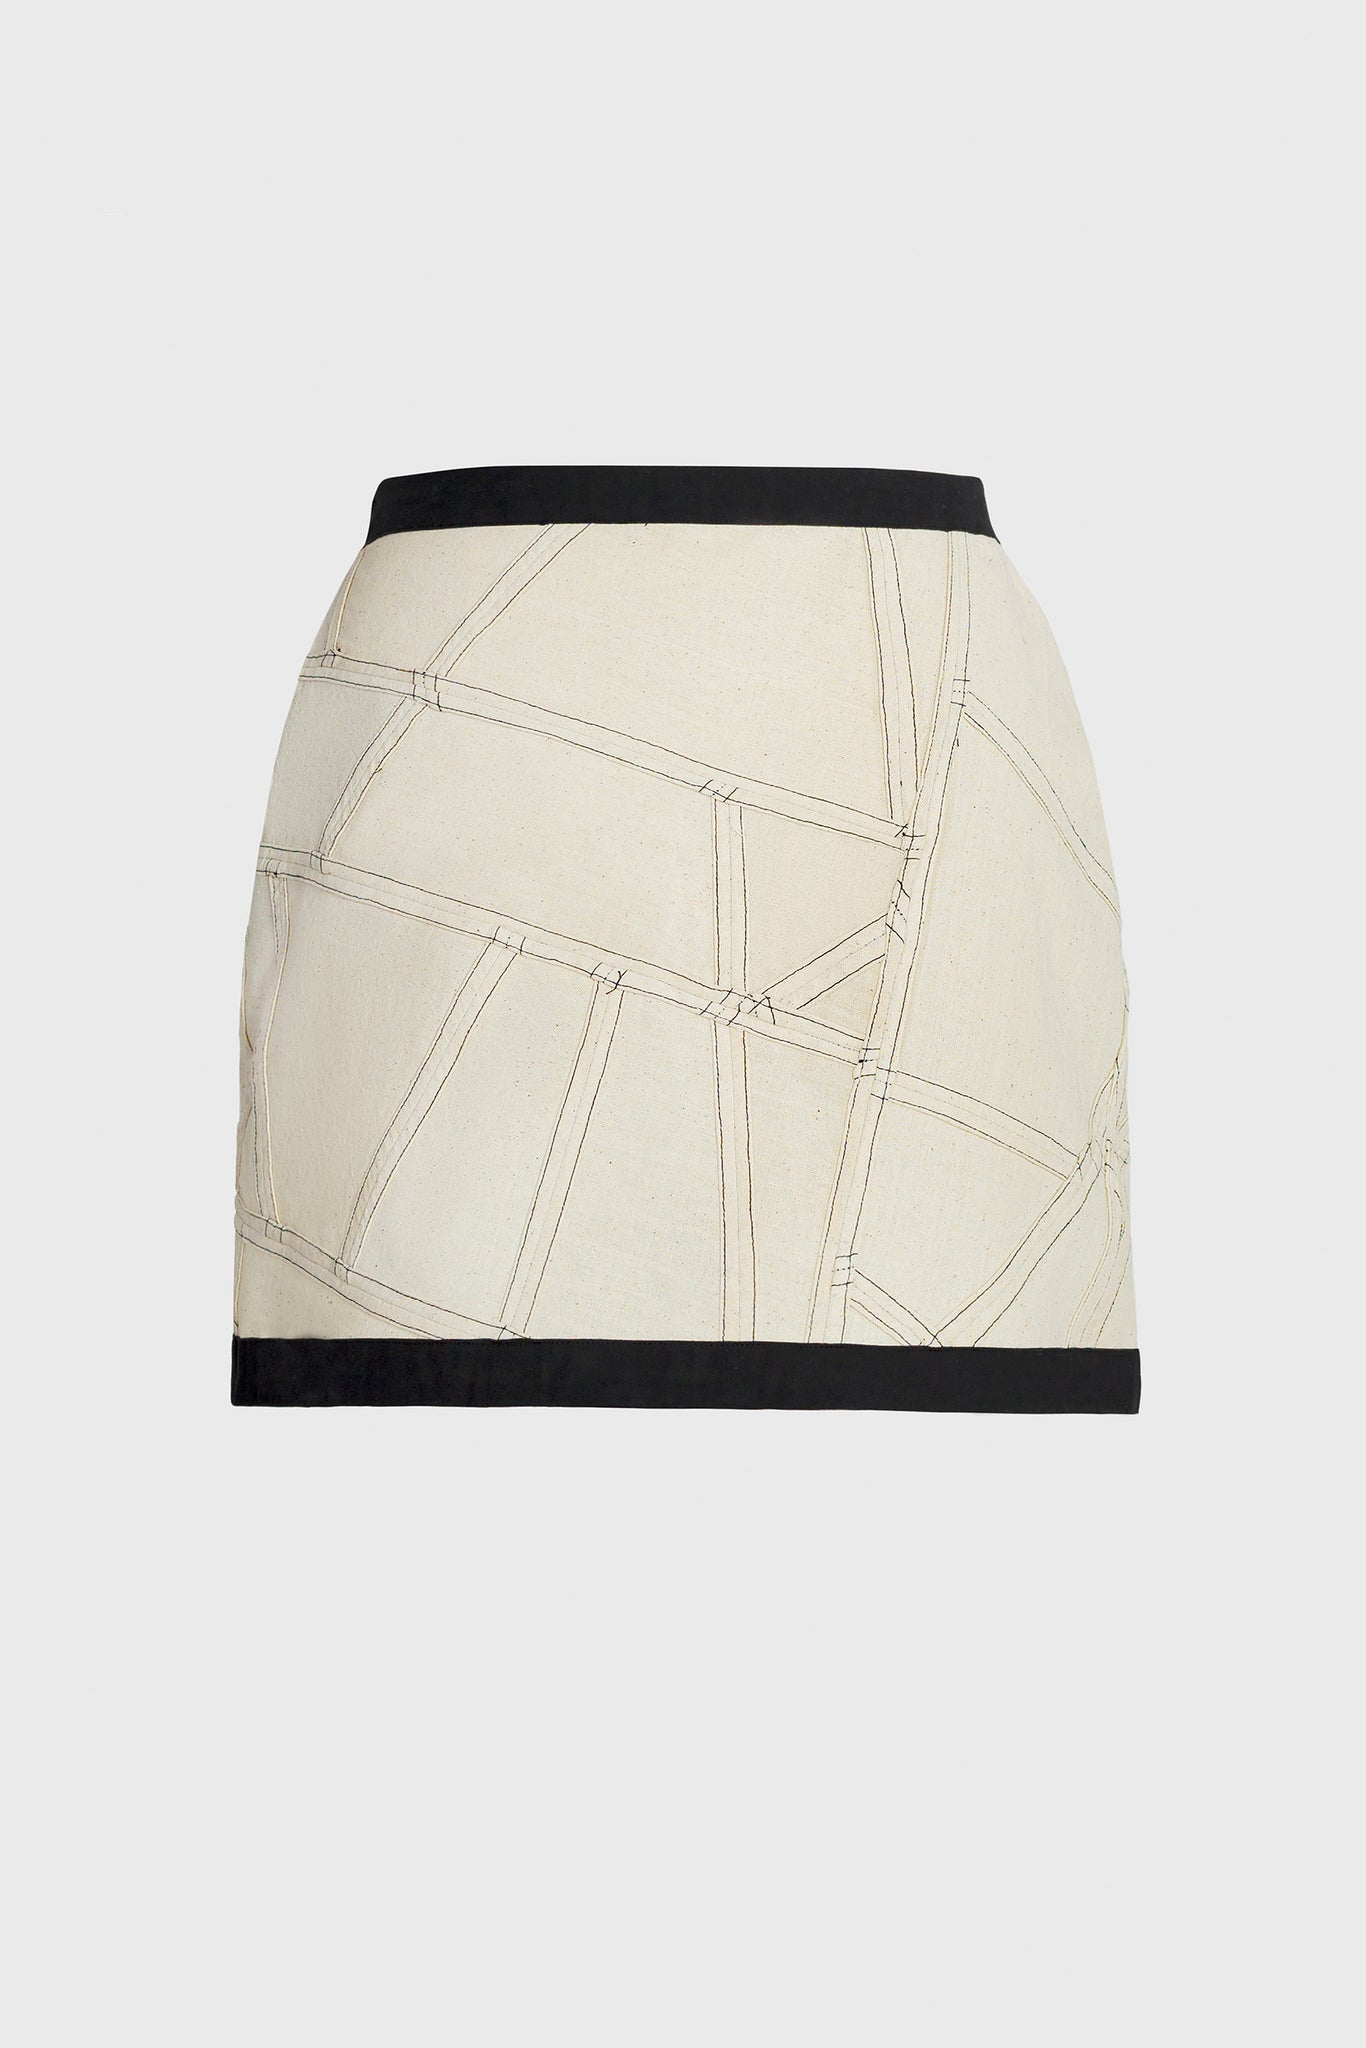 women's skirt, designed as an unisex item, architecture graphic thread lines over patches of cotton, abstract line pattern front and back, wear it low waist as a short skirt, or high waist as a mini skirt. fun dancing style, party outfit, futuristic